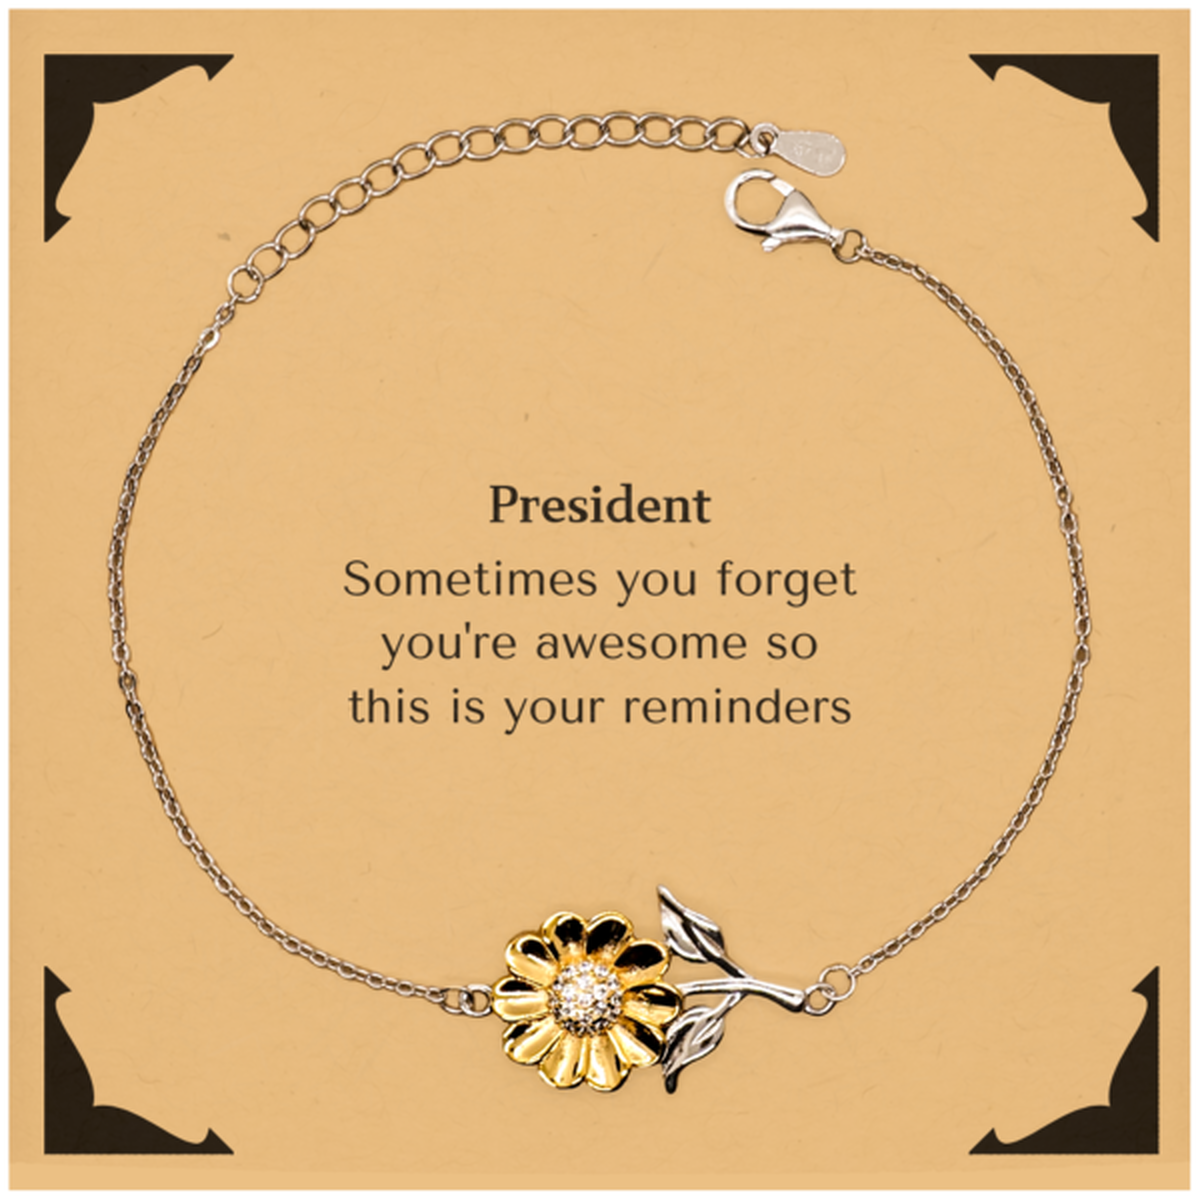 Sentimental President Sunflower Bracelet, President Sometimes you forget you're awesome so this is your reminders, Graduation Christmas Birthday Gifts for President, Men, Women, Coworkers